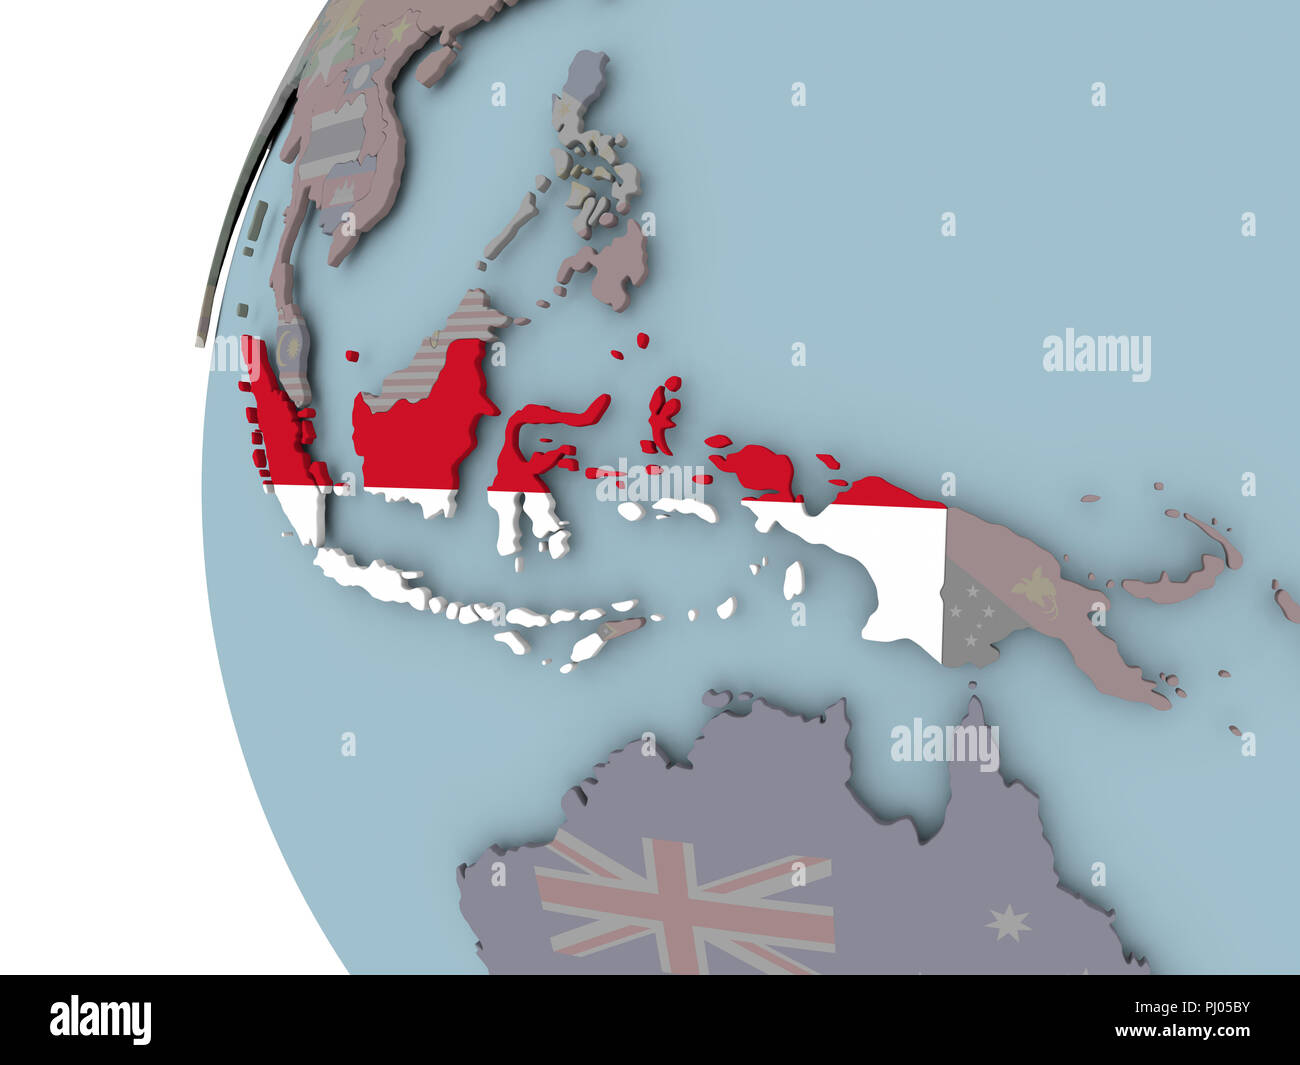 Indonesia with embedded flag on political globe. 3D illustration. Stock Photo